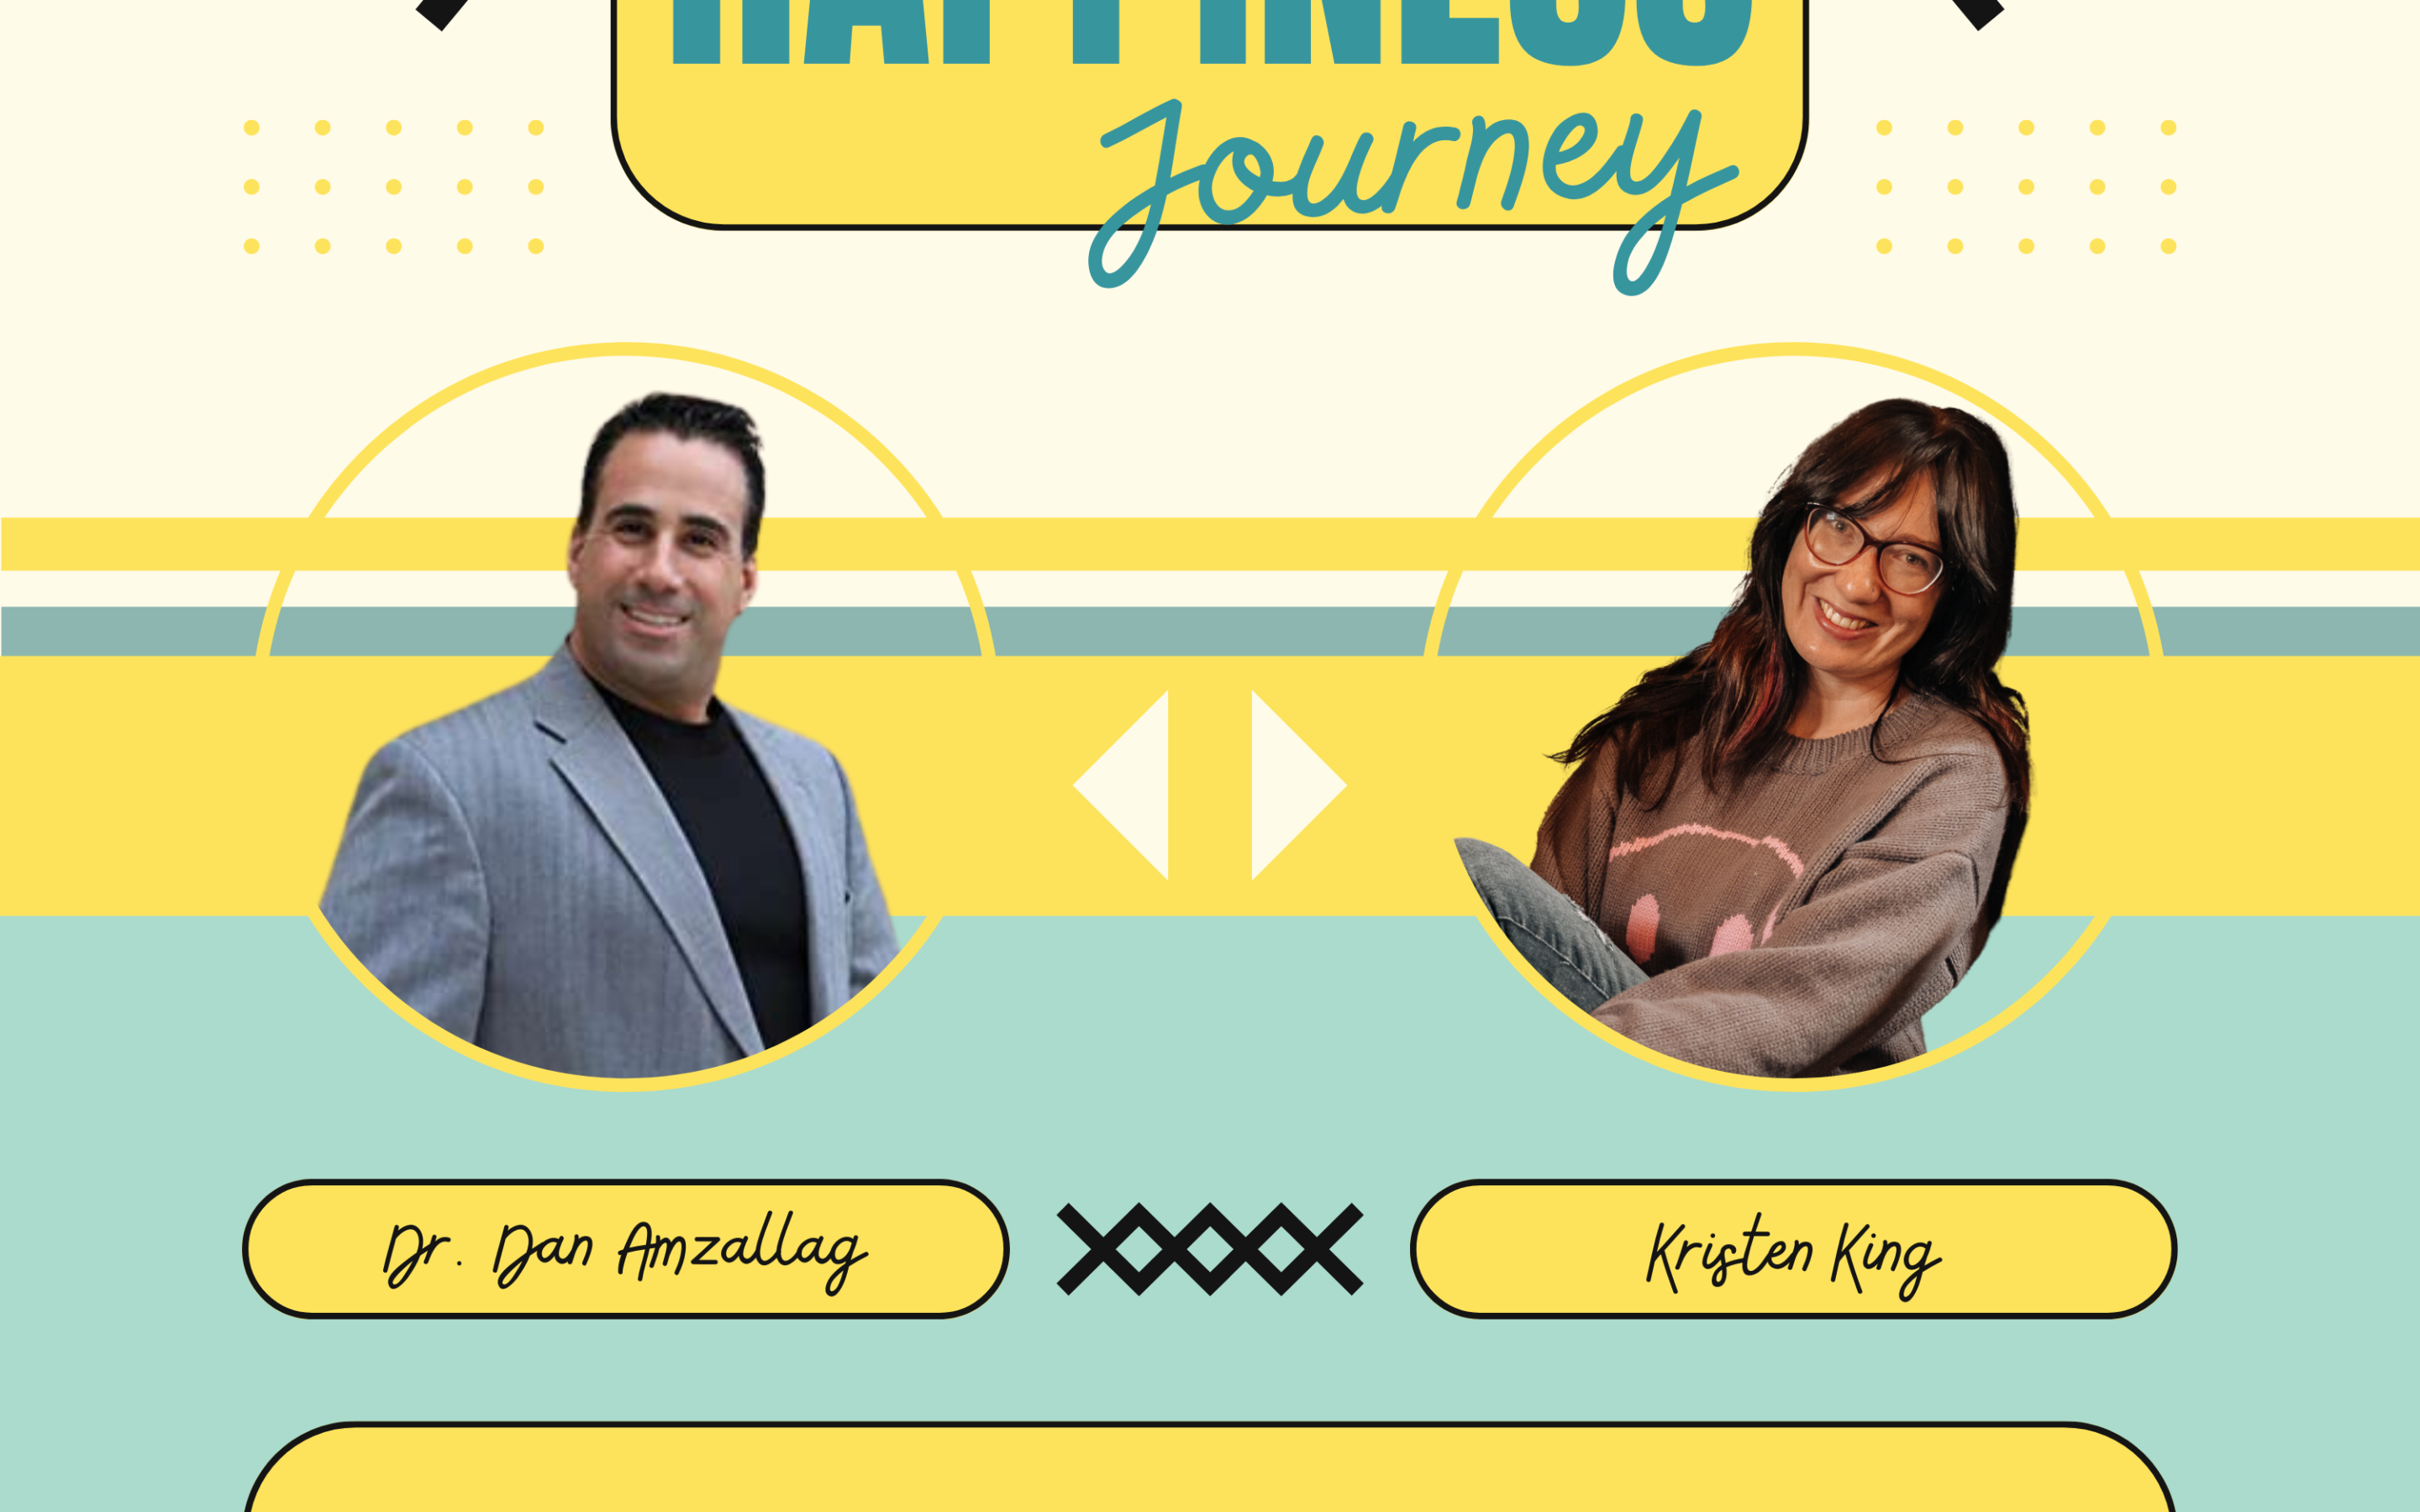 Kristen King on The Happiness Journey With Dr Dan Podcast